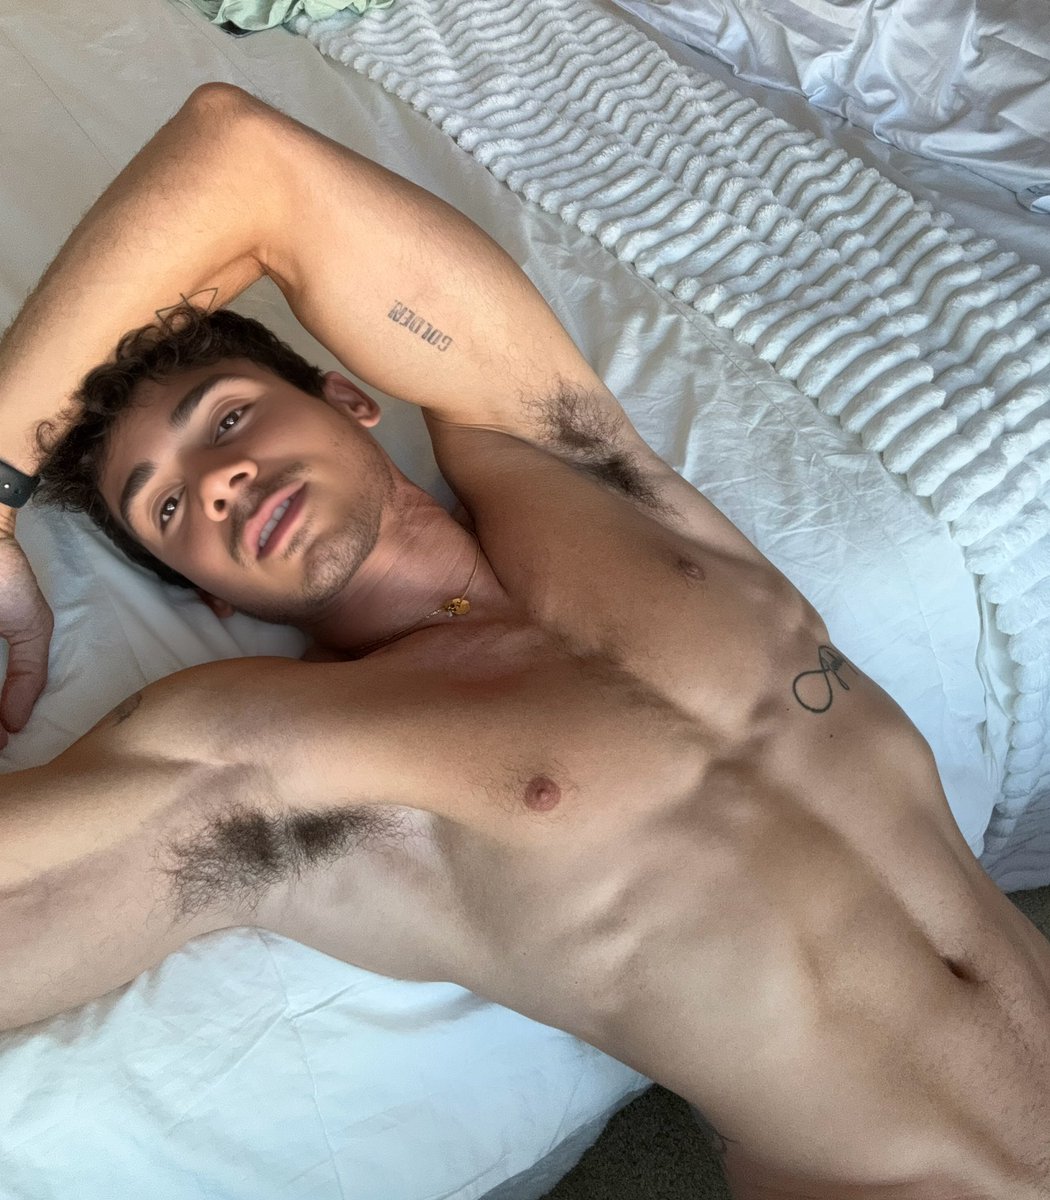 MY FAVORITE PIT PIC OF THE DAY It is said, 'a picture is worth a thousand words', however a picture of Osmar Sanjurjo is worth a thousand fantasies! Make sure to follow the dreamy, male model @osmarsanjurjo and on Instagram: instagram.com/osmar.sanjurjo #gayarmpitlover #armpits #gay…